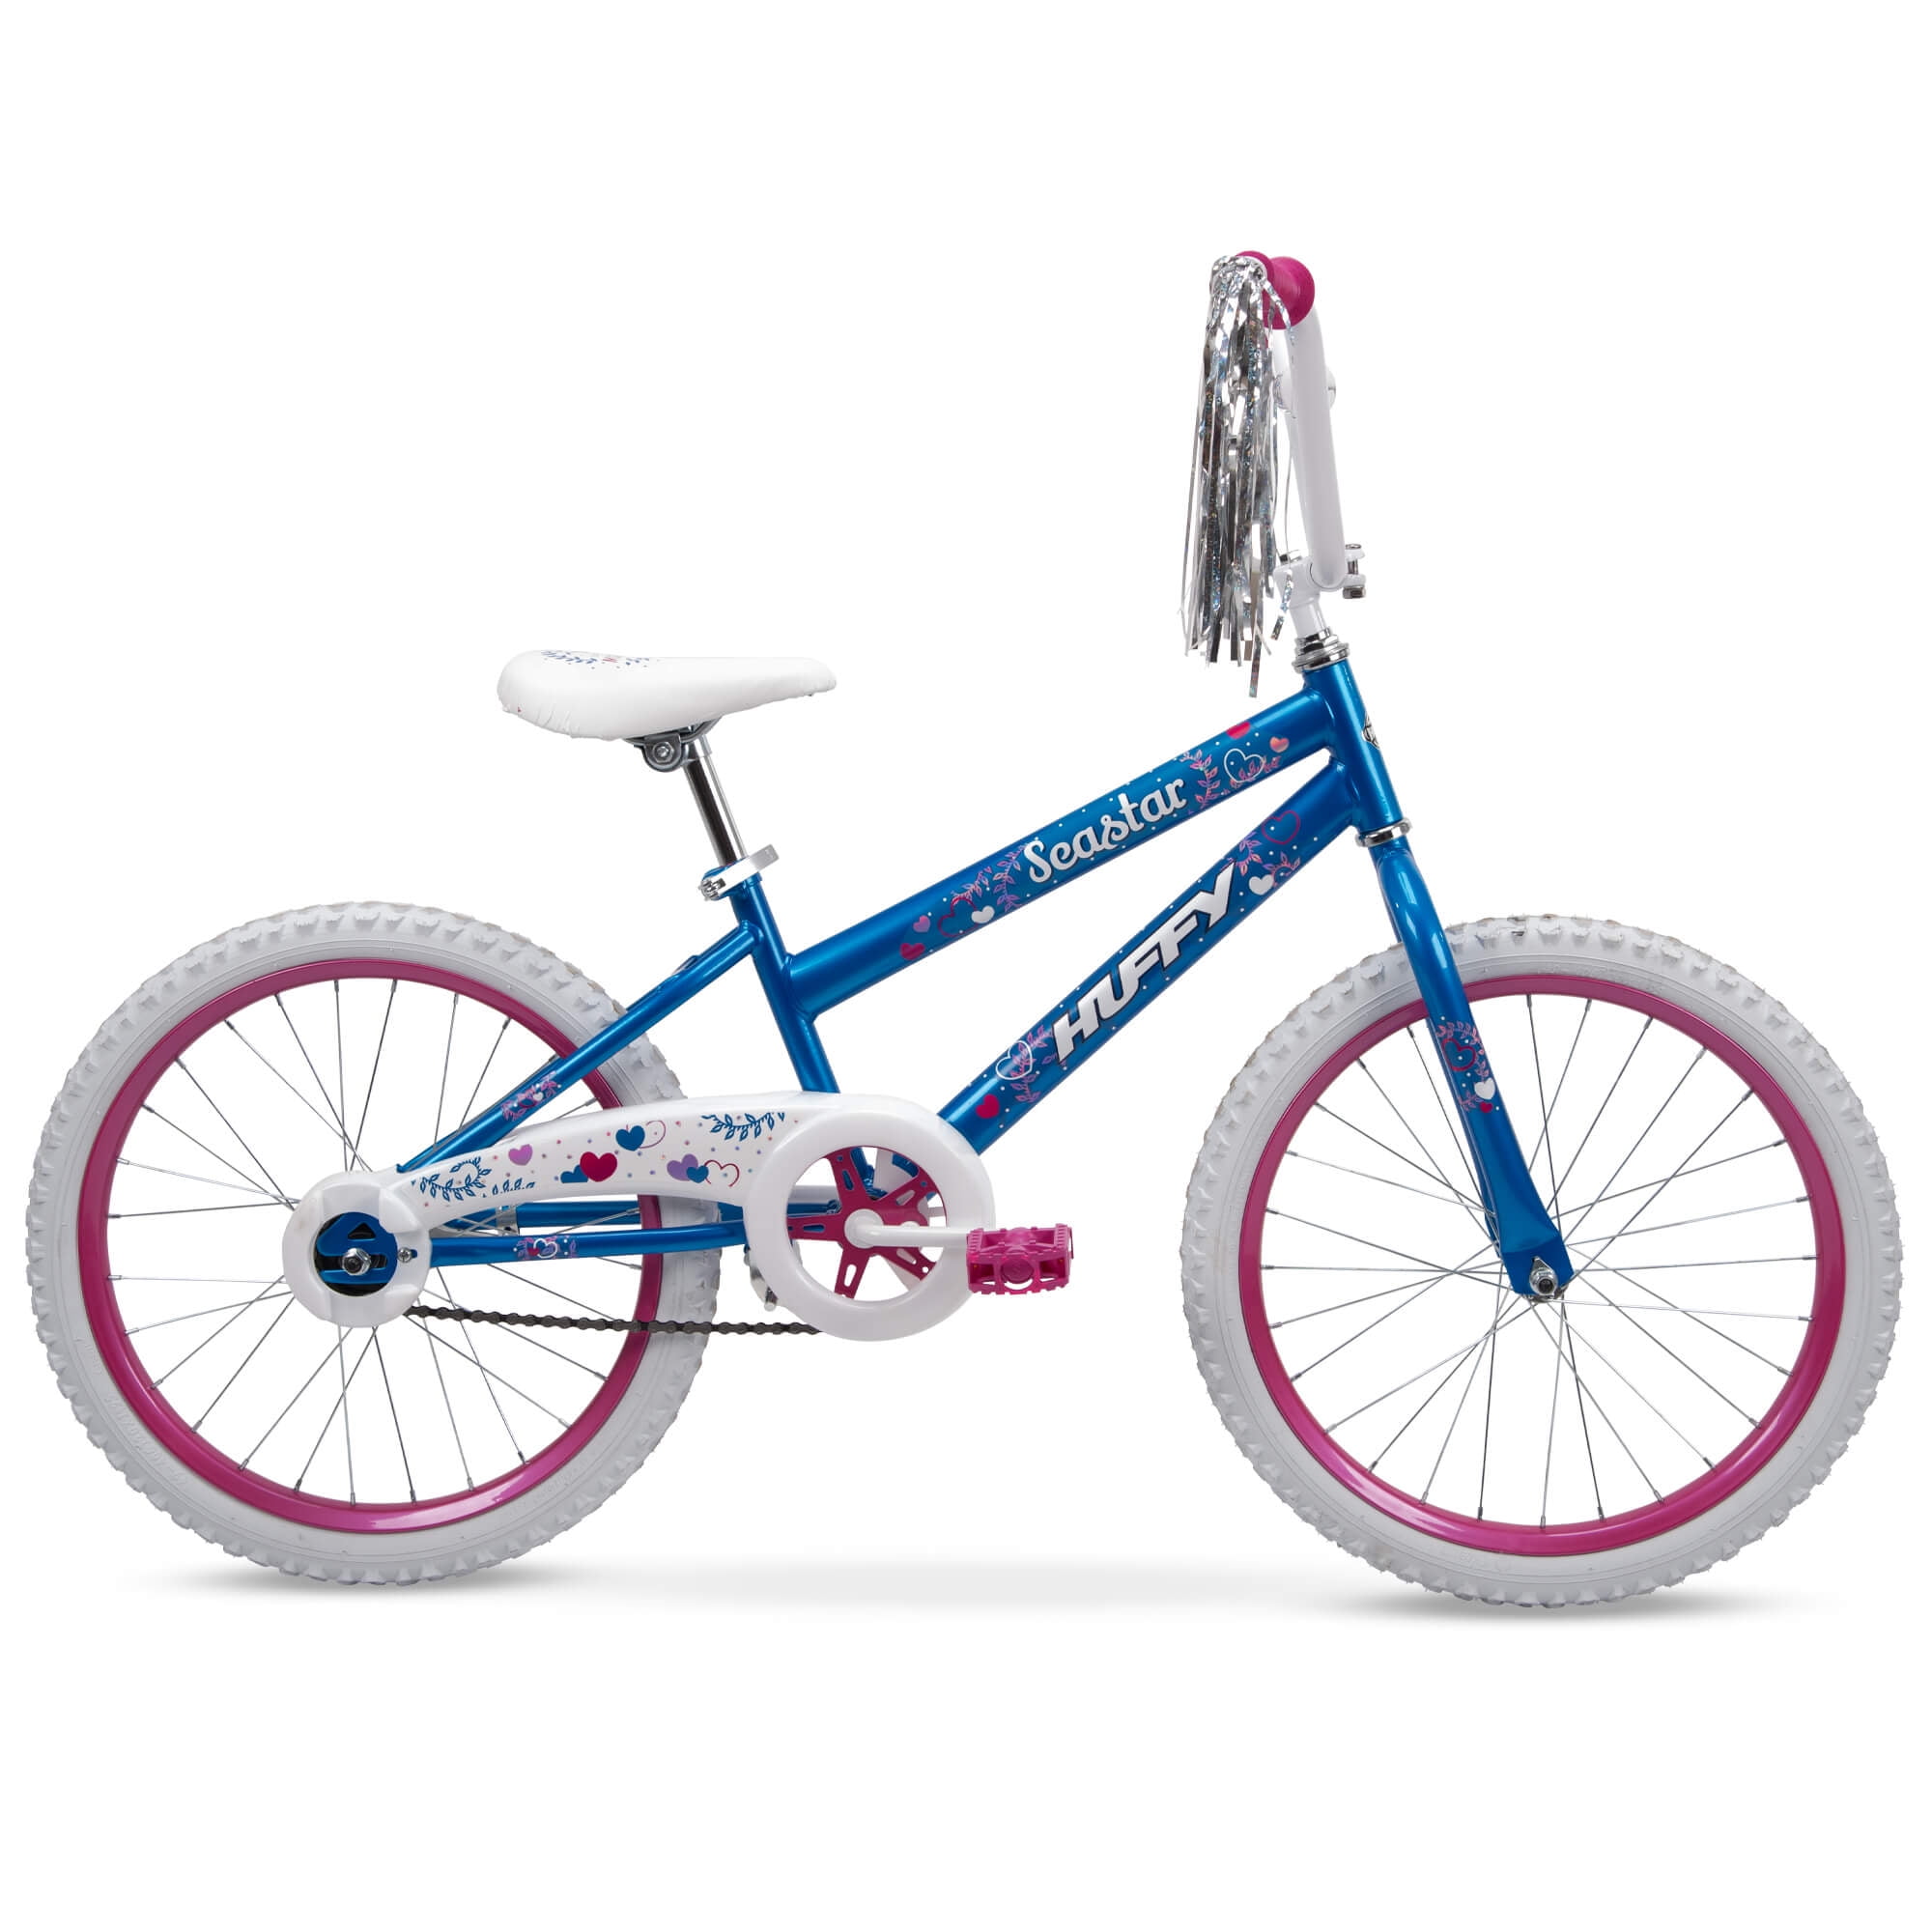 12 Huffy Illuminate Girl's Bike 20 Inch Sizes for Kids Ages 3 to 9 Years Old 16 